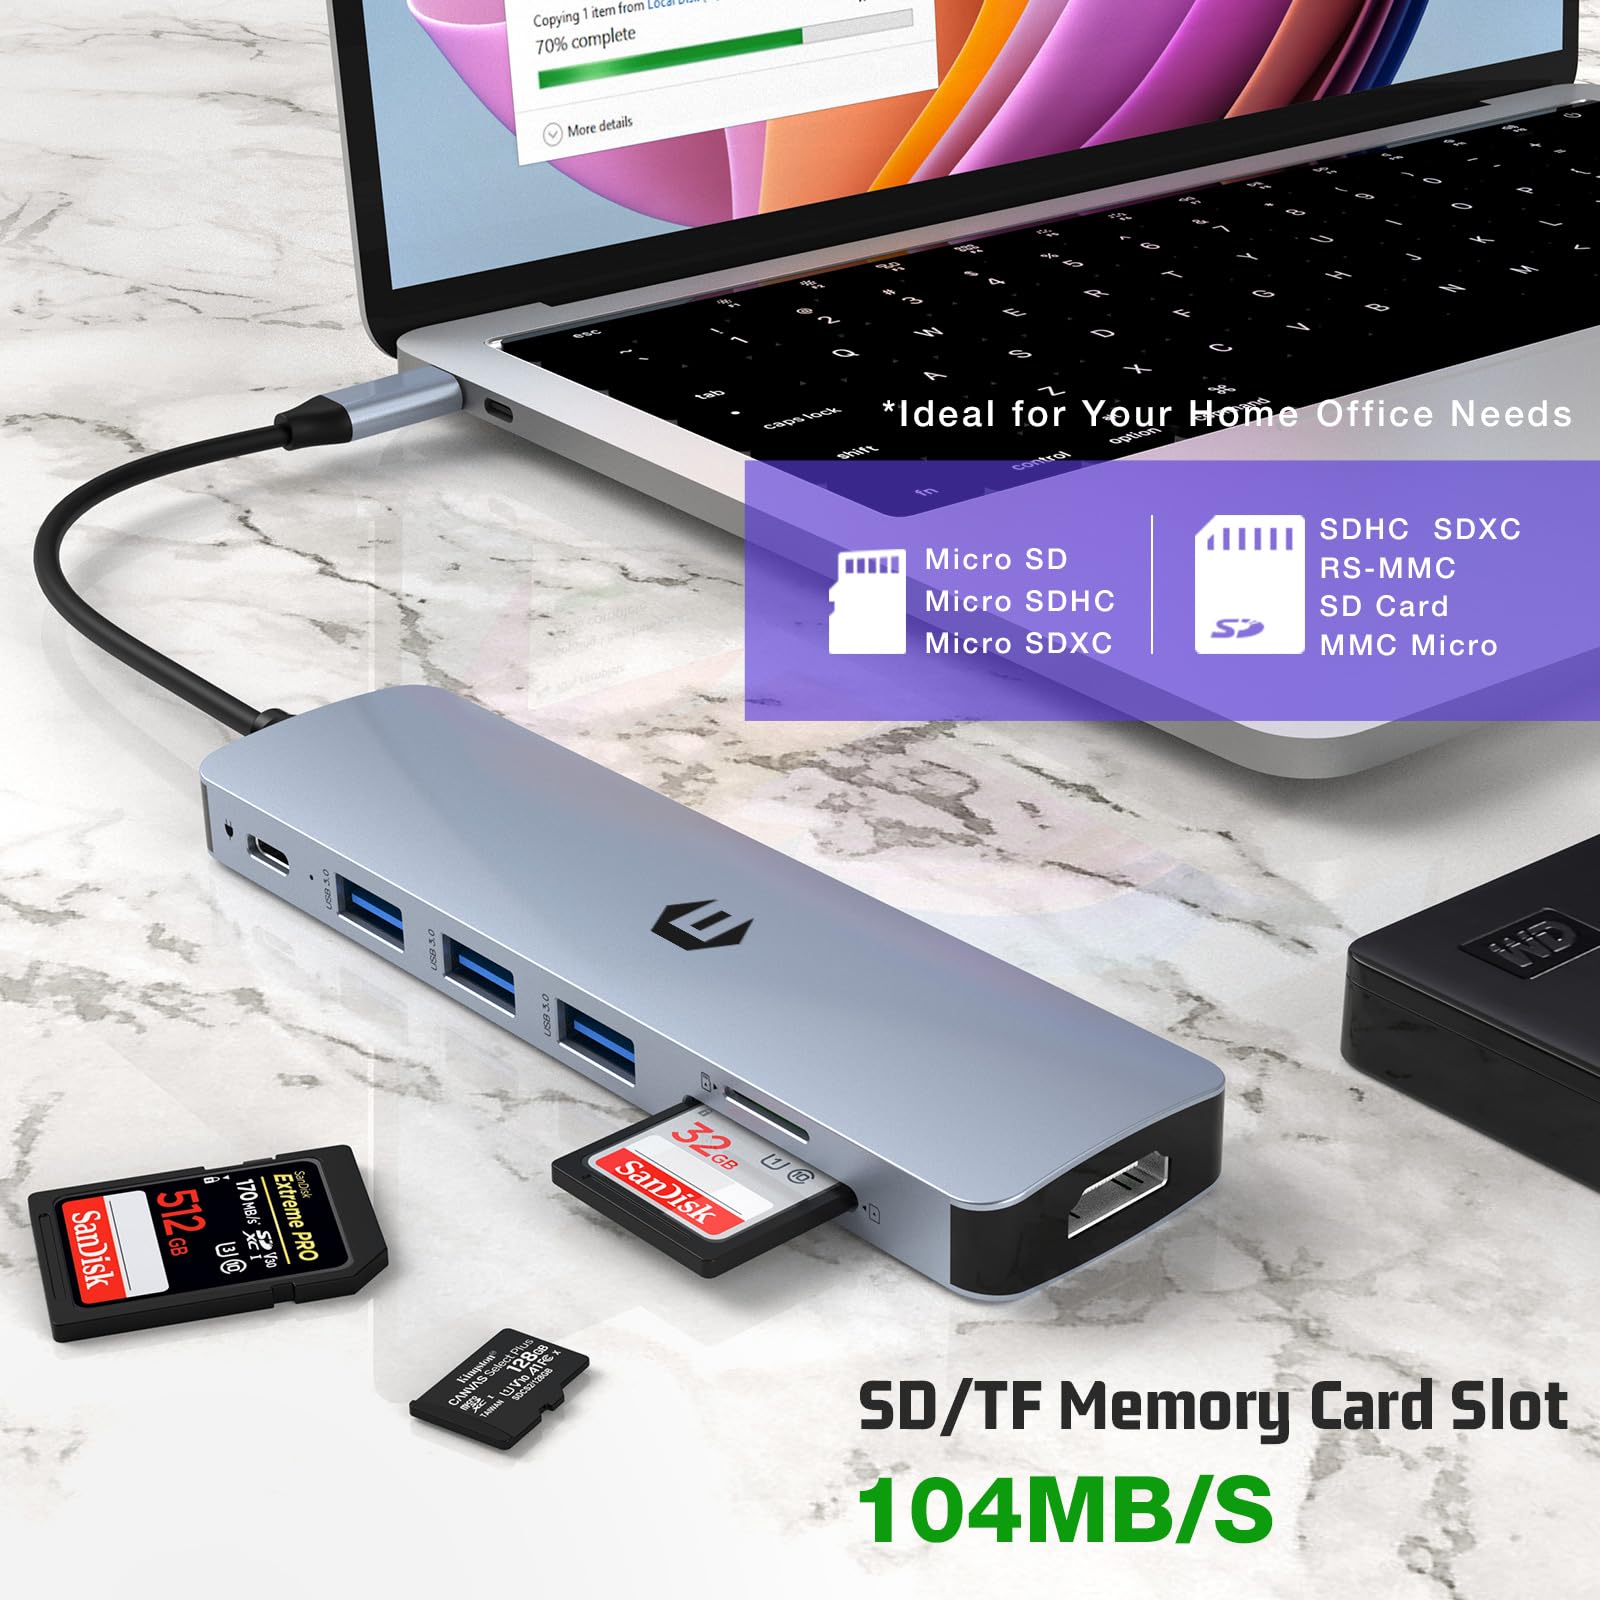 Oditton USB C HUB, 7 in 1 Laptop Multiport Adapter Hub with HDMI Output, 100W Rapid Charging, 3 x USB 3.0 Ports, SD/TF Reader, Compatible for USB C Laptops Dell XPS/HP/Surface and Other Type C Devices